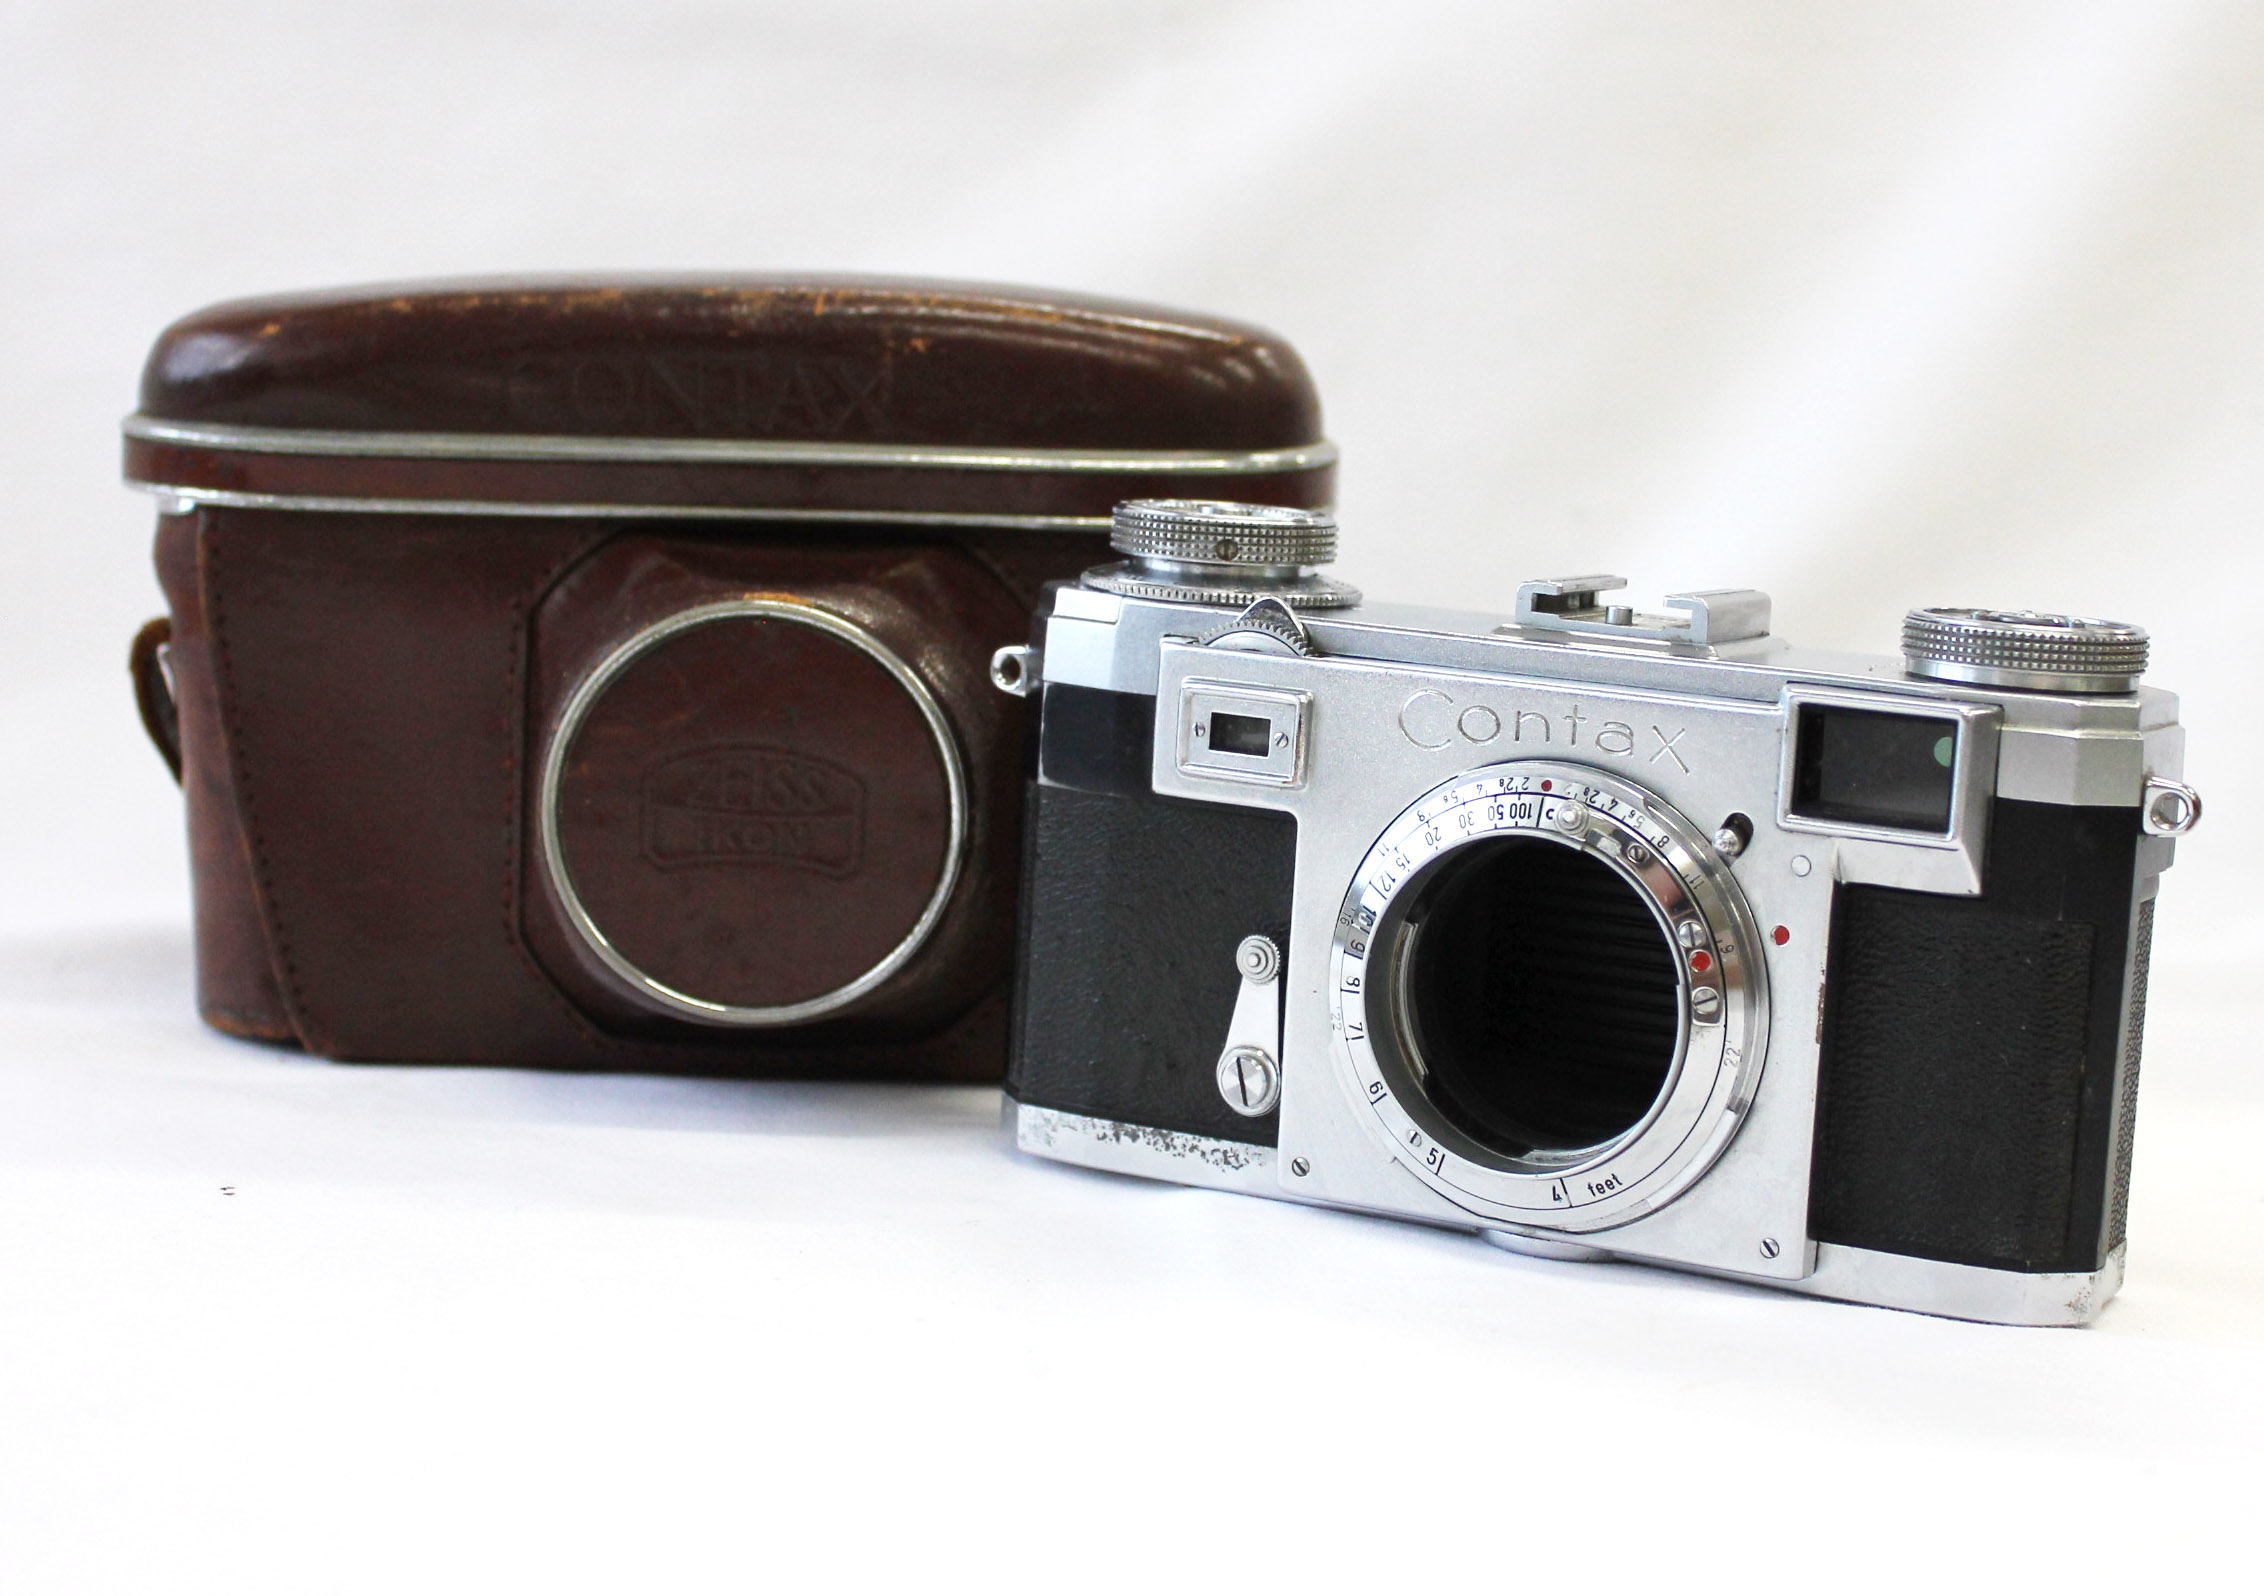 Japan Used Camera Shop | Zeiss Ikon Contax IIa 2a Color Dial Rangefinder 35mm Film Camera with Case from Japan